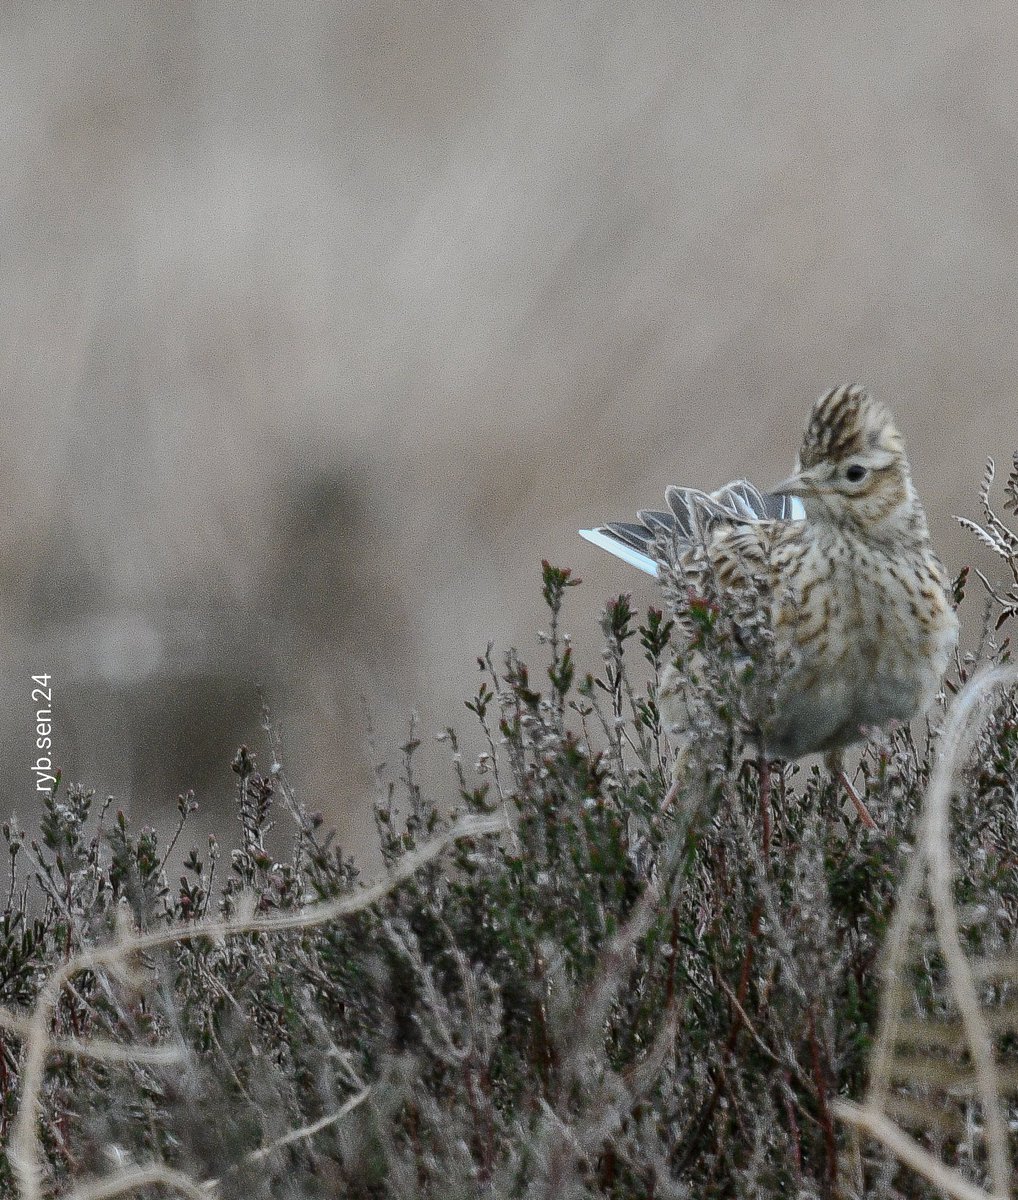 #CleeHills
#Shropshire 
Skylark... just being one with the heather.